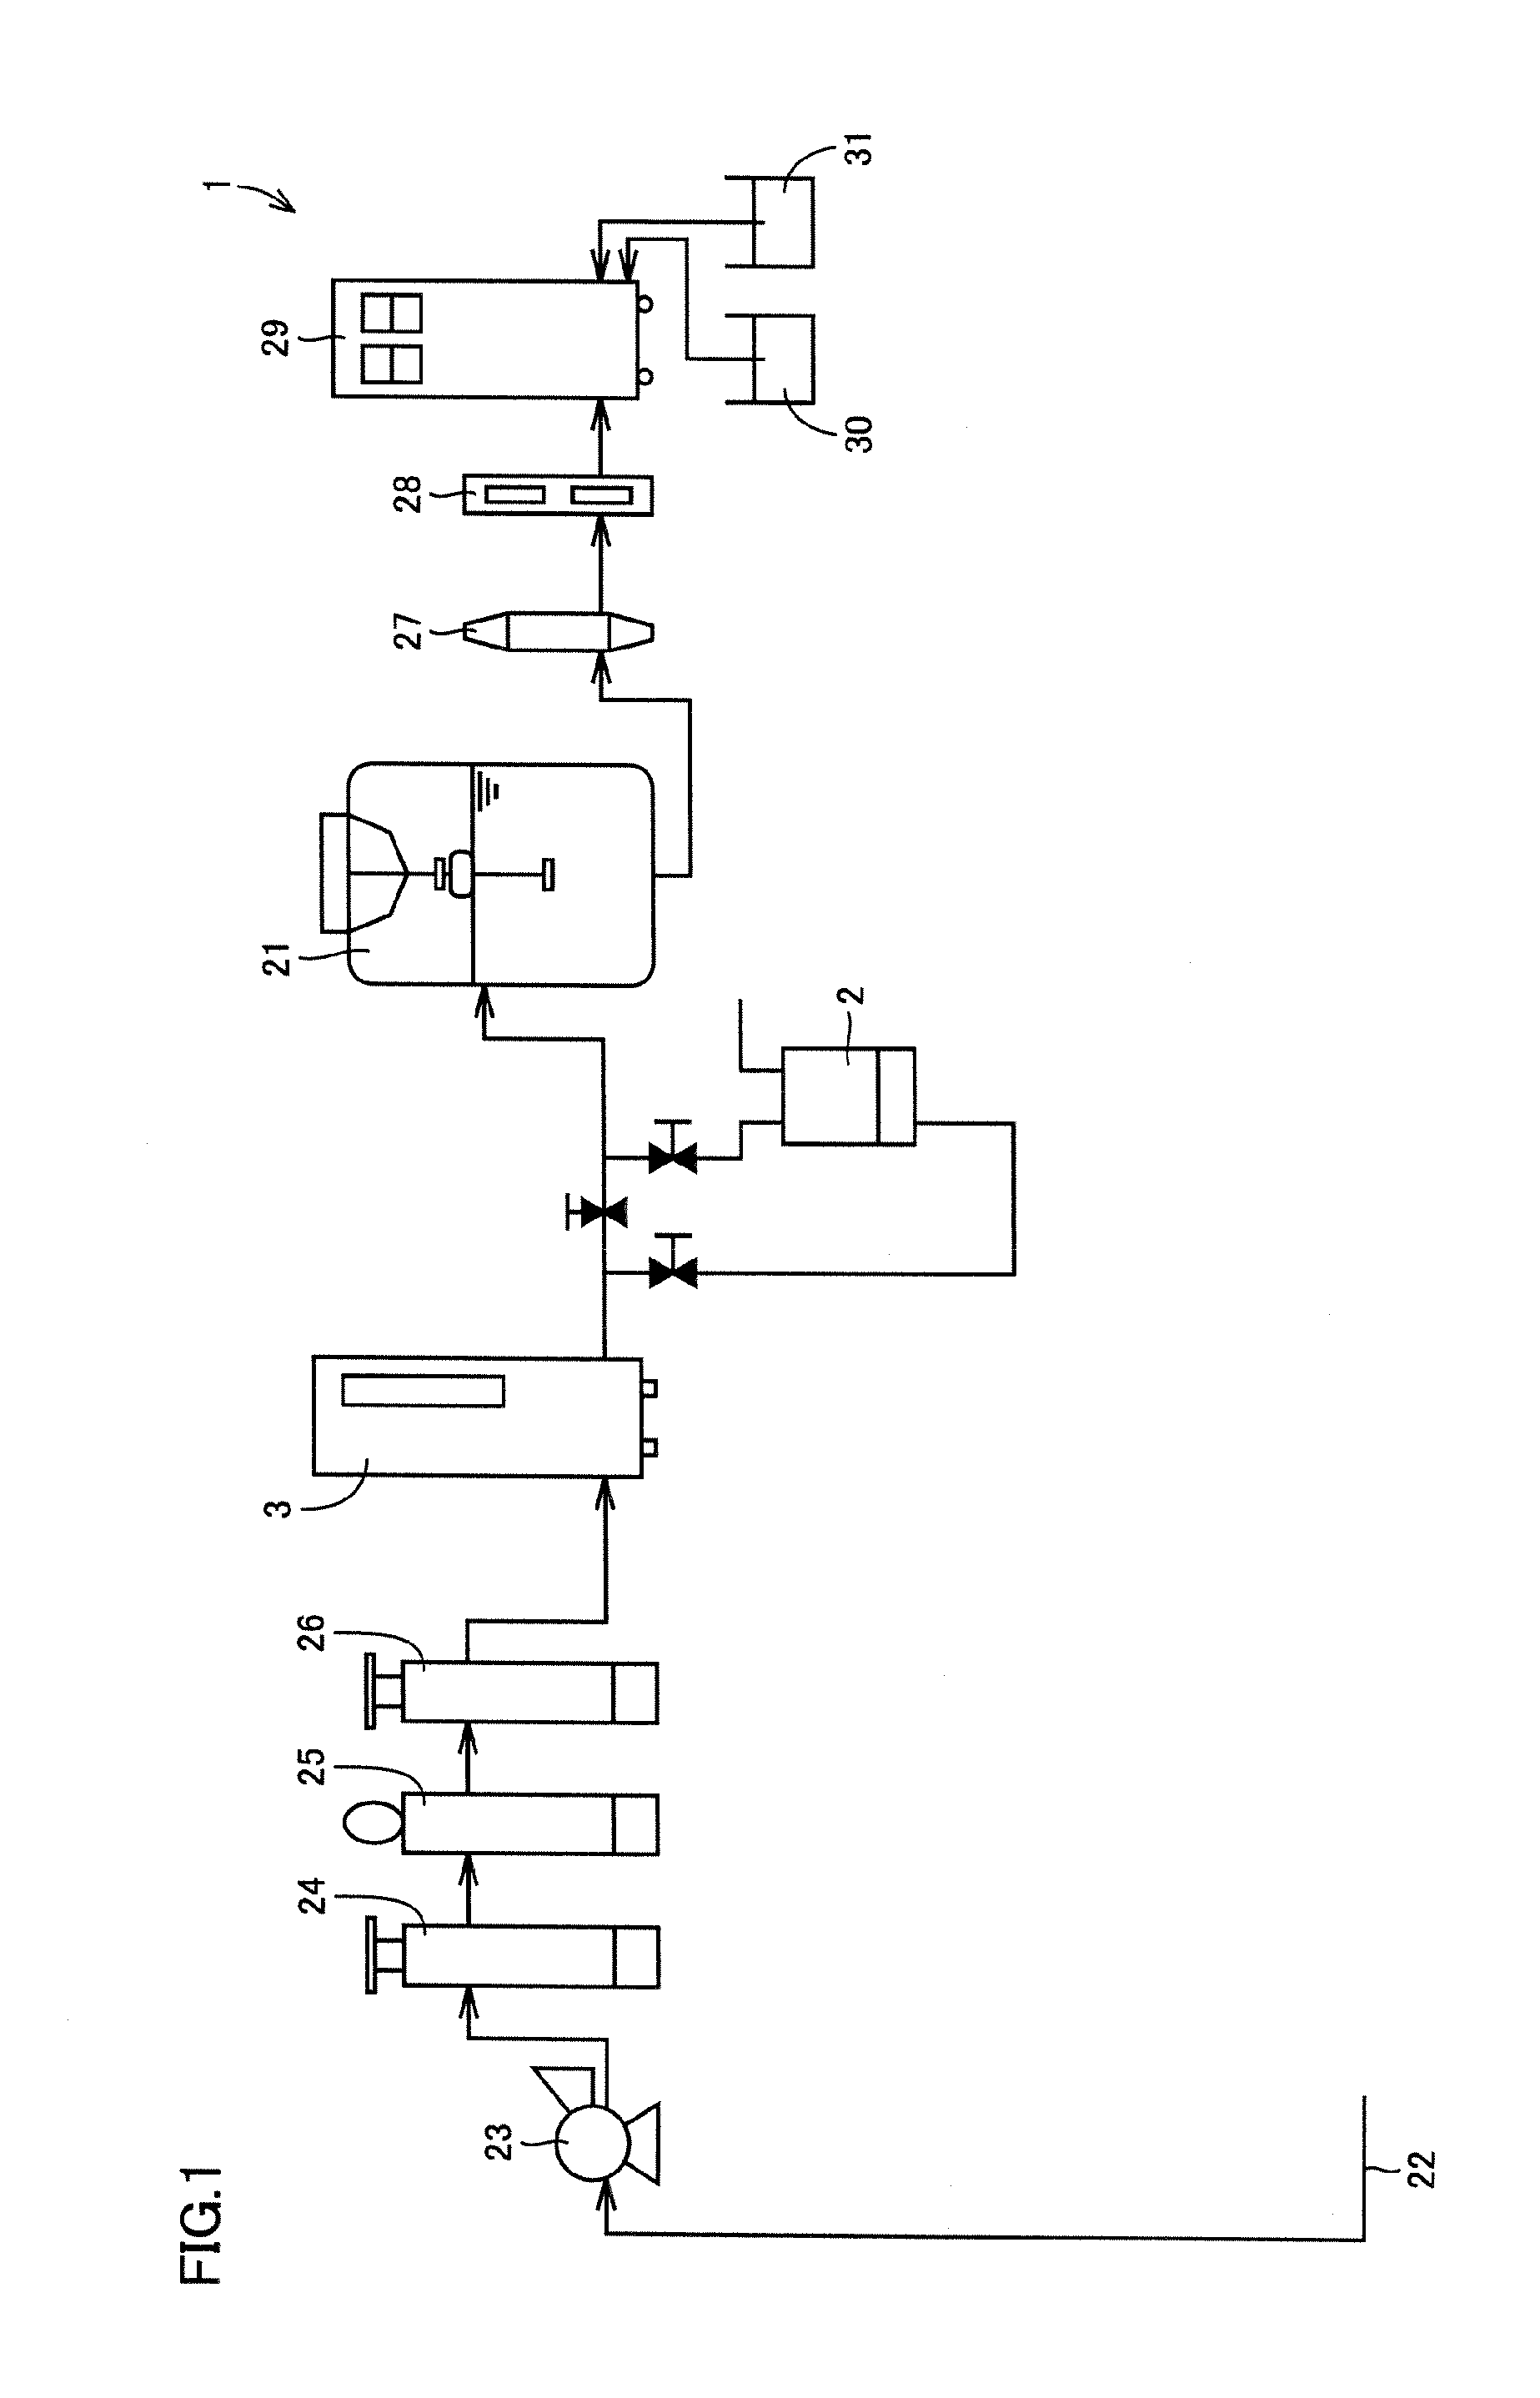 Apparatus for producing water for preparation of dialysis solution